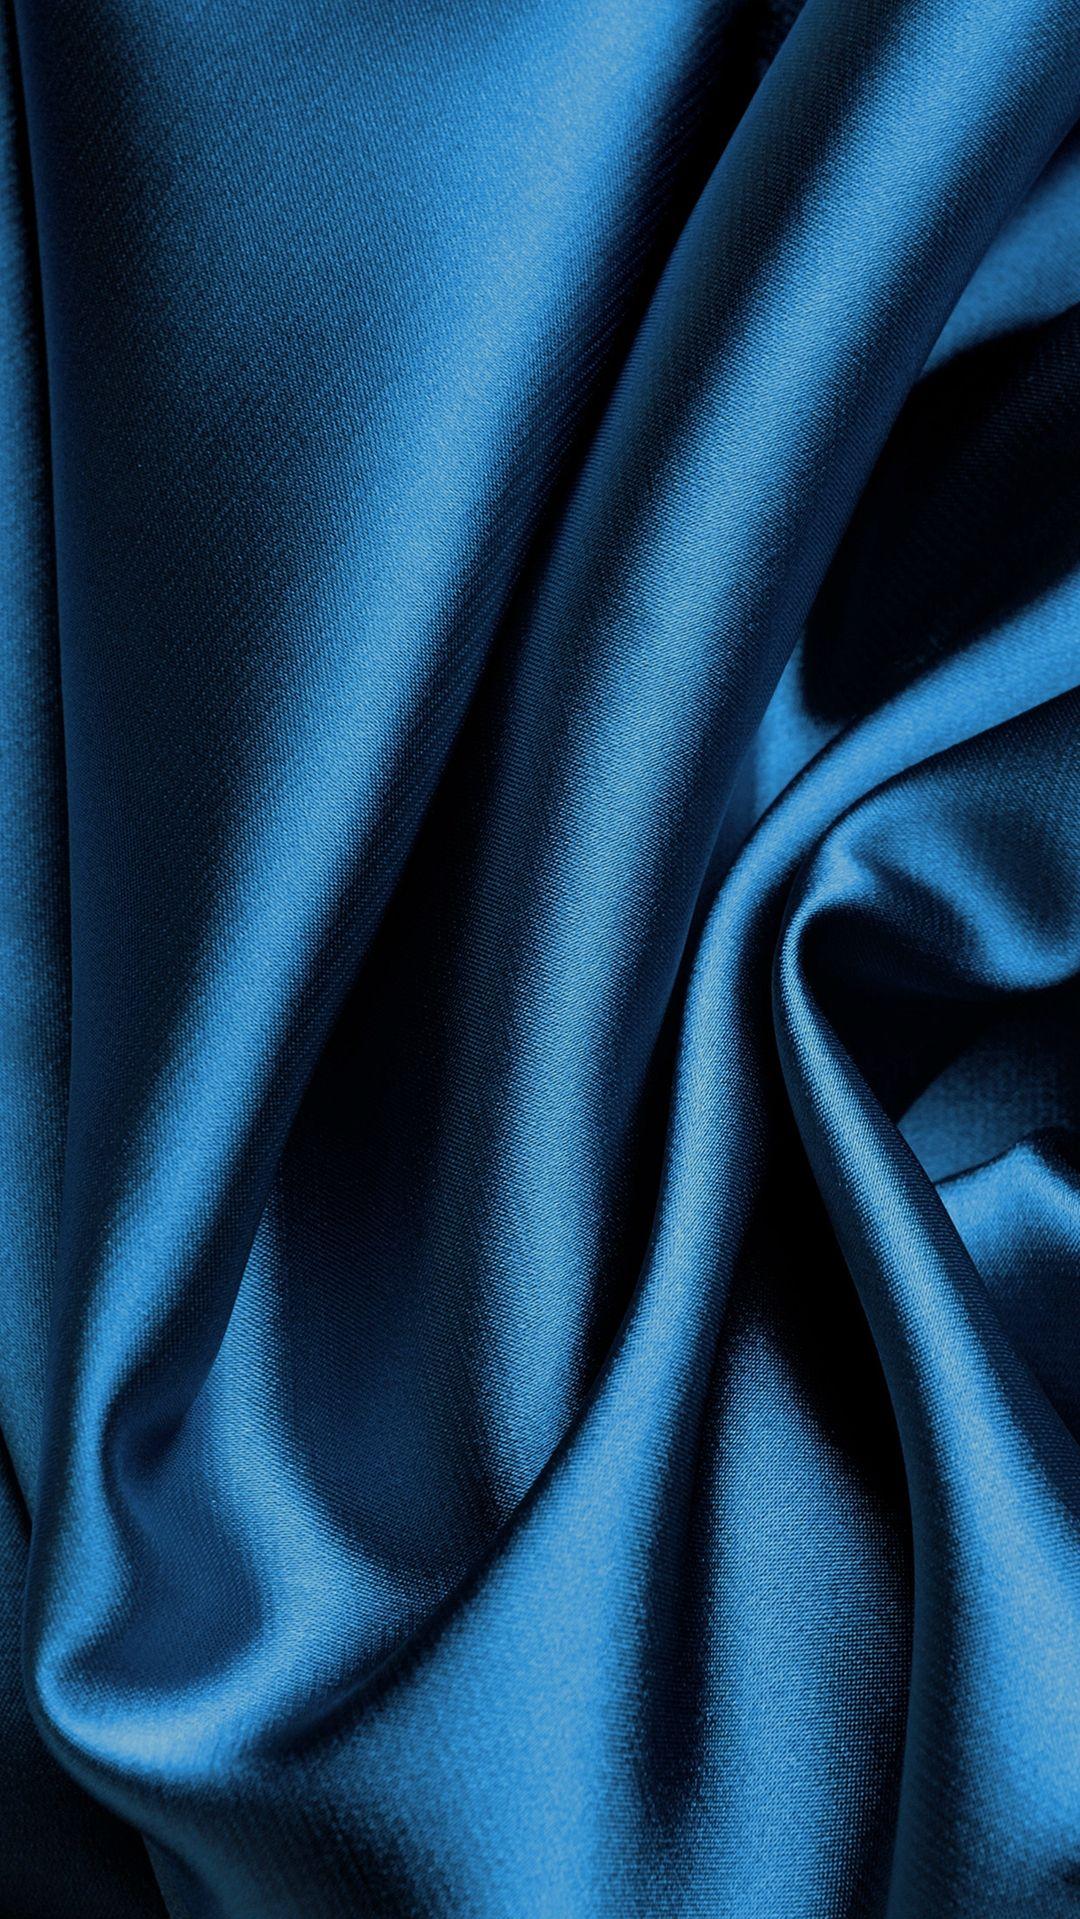 The Sublime Blue Silk Fabric Texture Wallpaper For iPhone